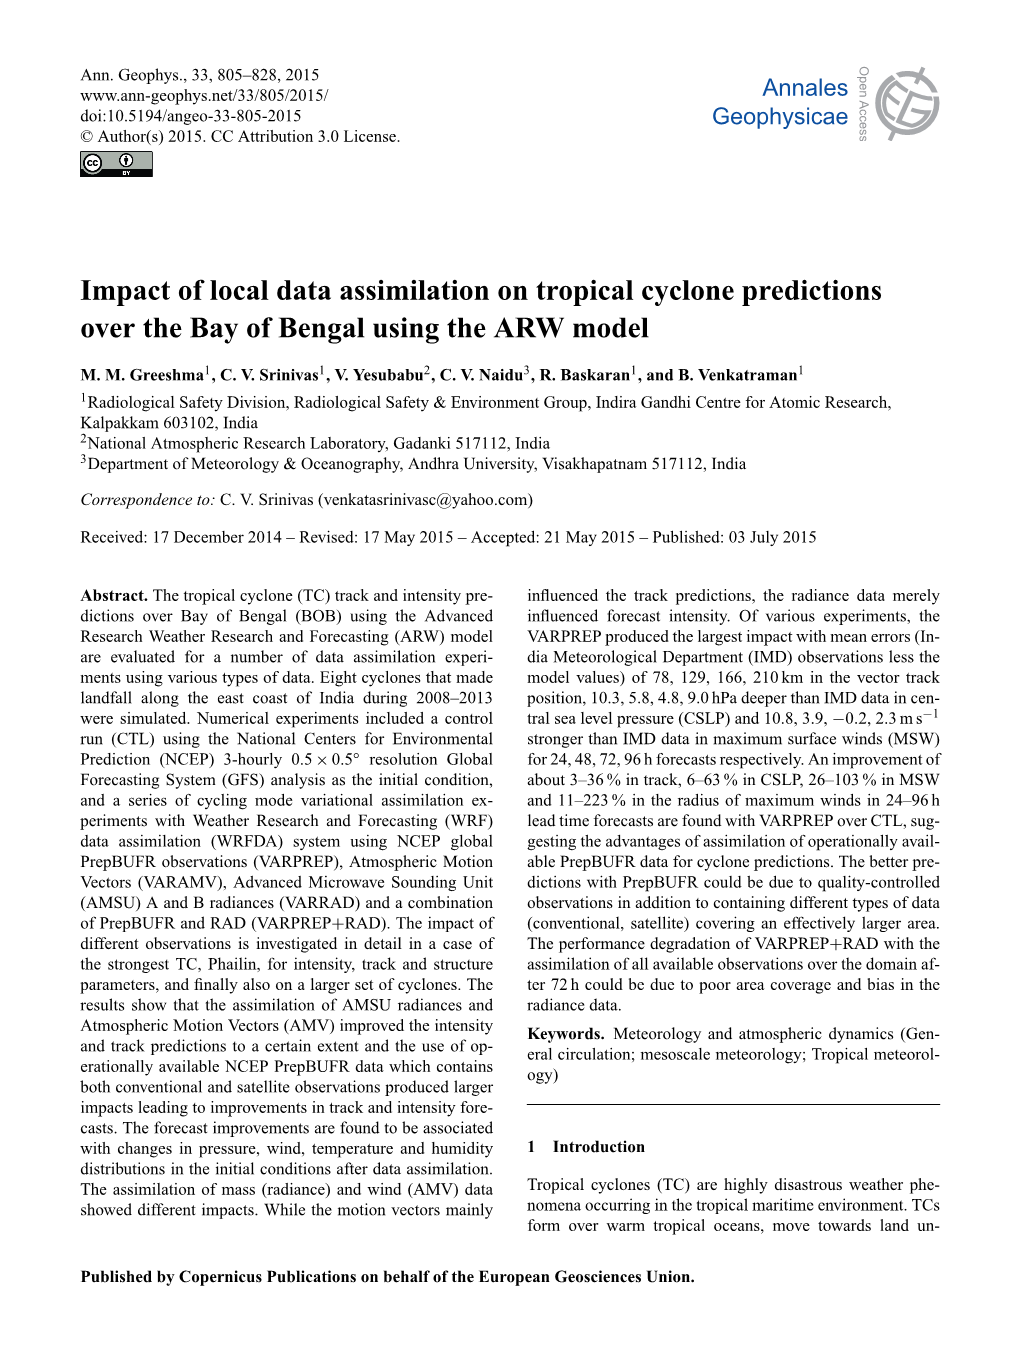 Impact of Local Data Assimilation on Tropical Cyclone Predictions Over the Bay of Bengal Using the ARW Model